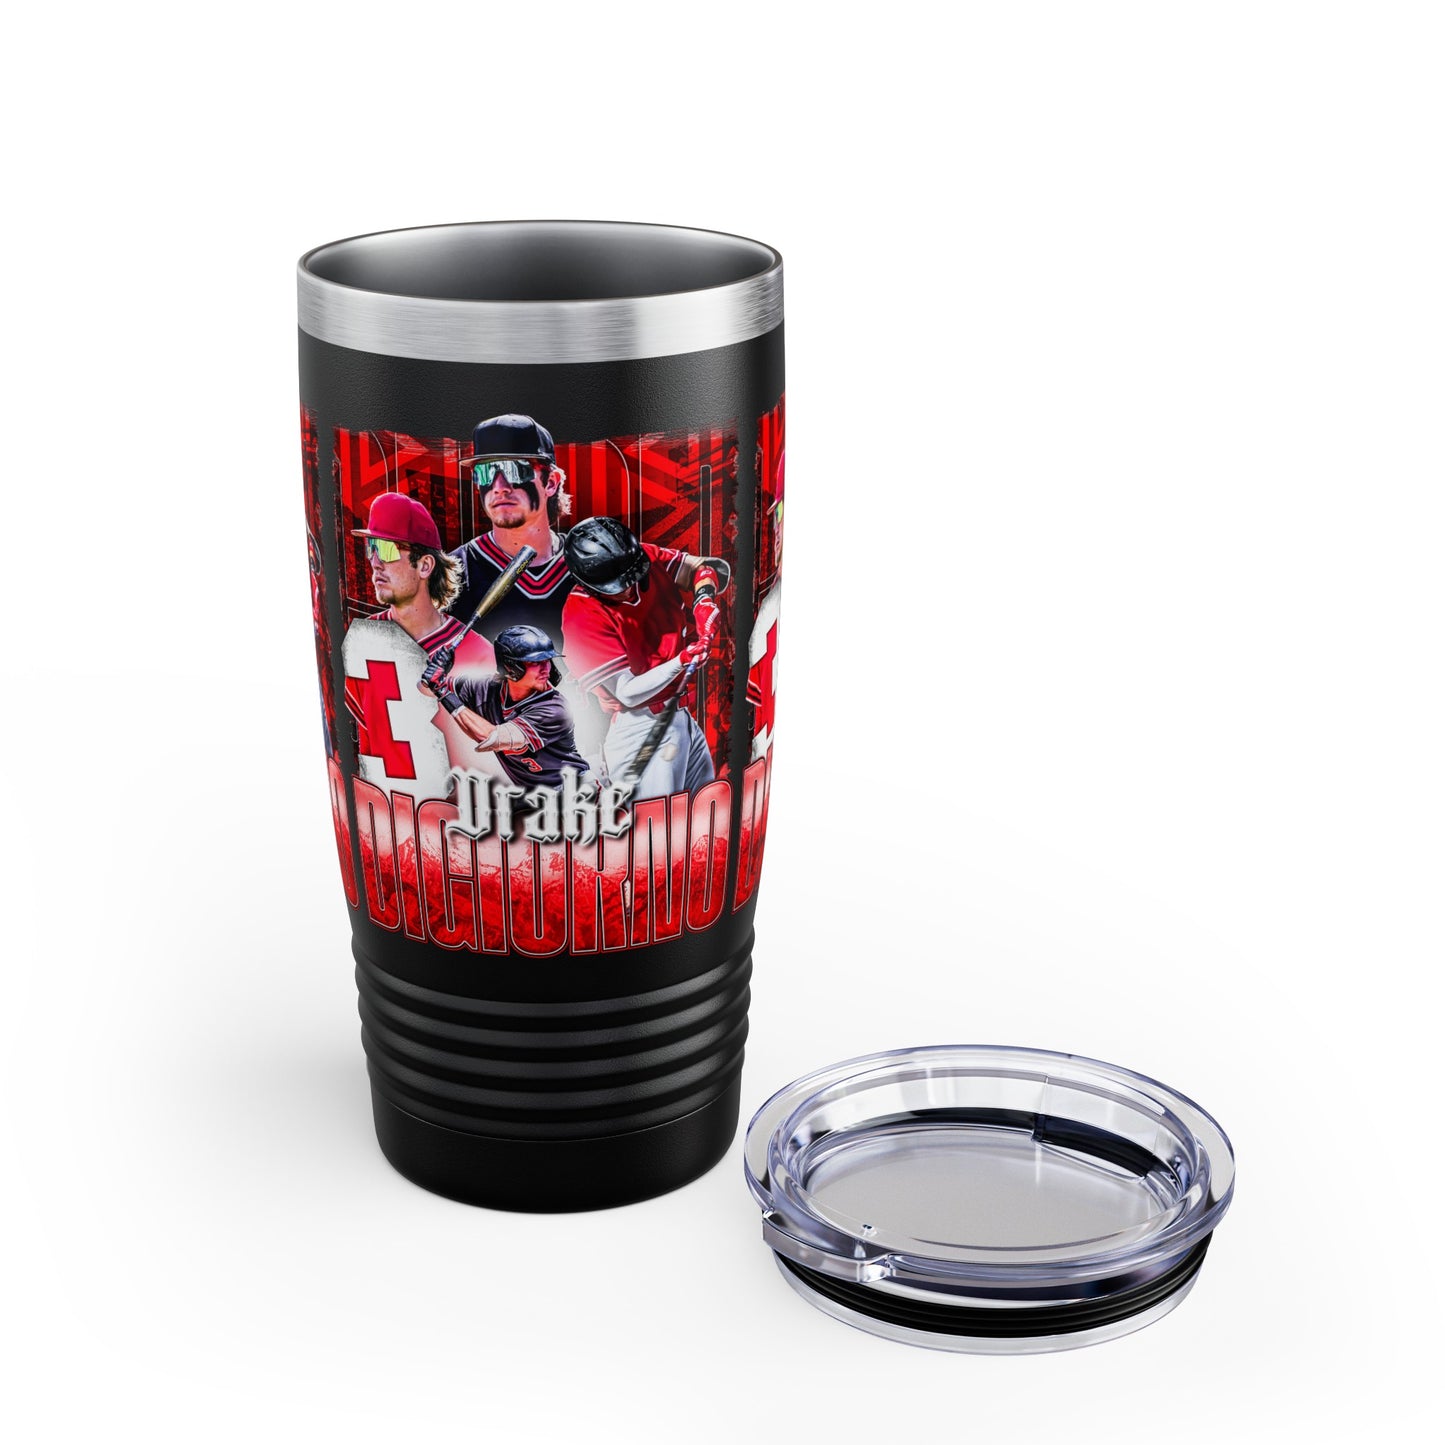 DIGIORNO STAINLESS STEEL TUMBLER